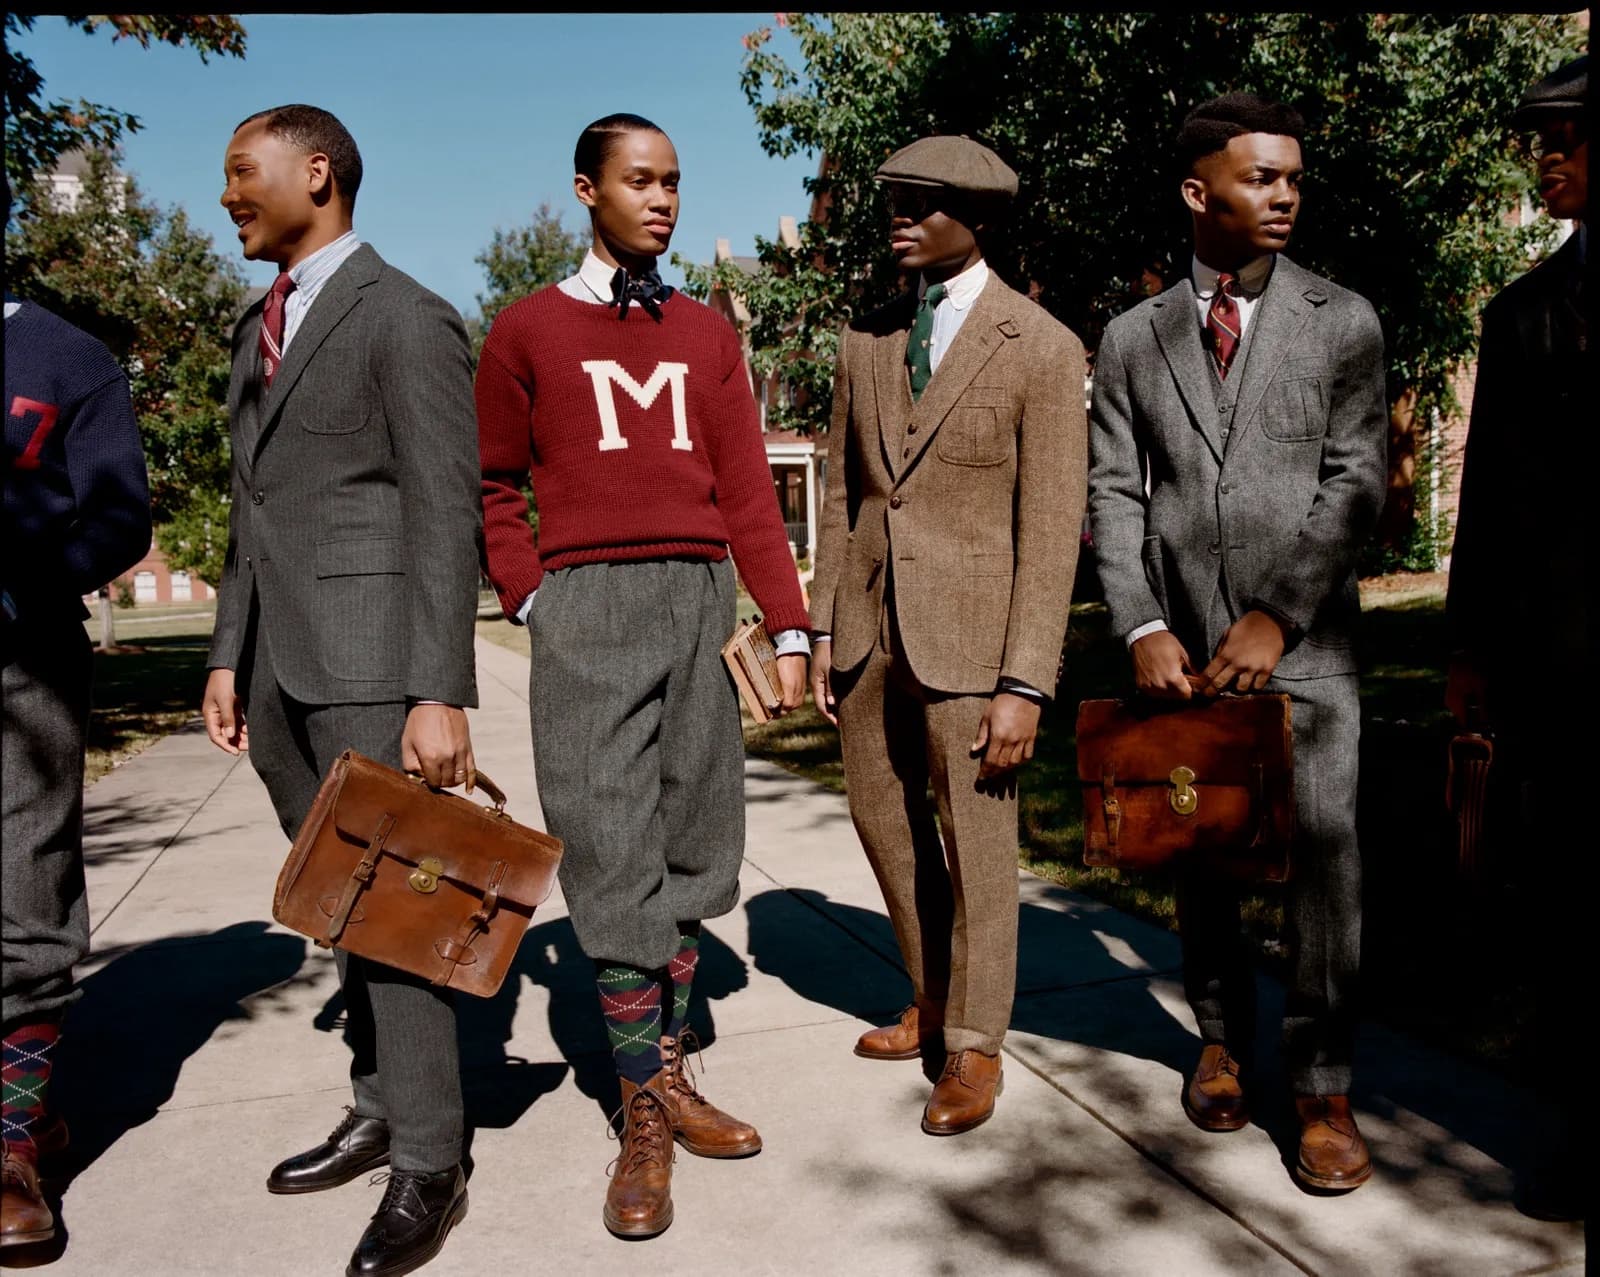 Ralph Lauren Morehouse and Spelman 2022 ad campaign photo